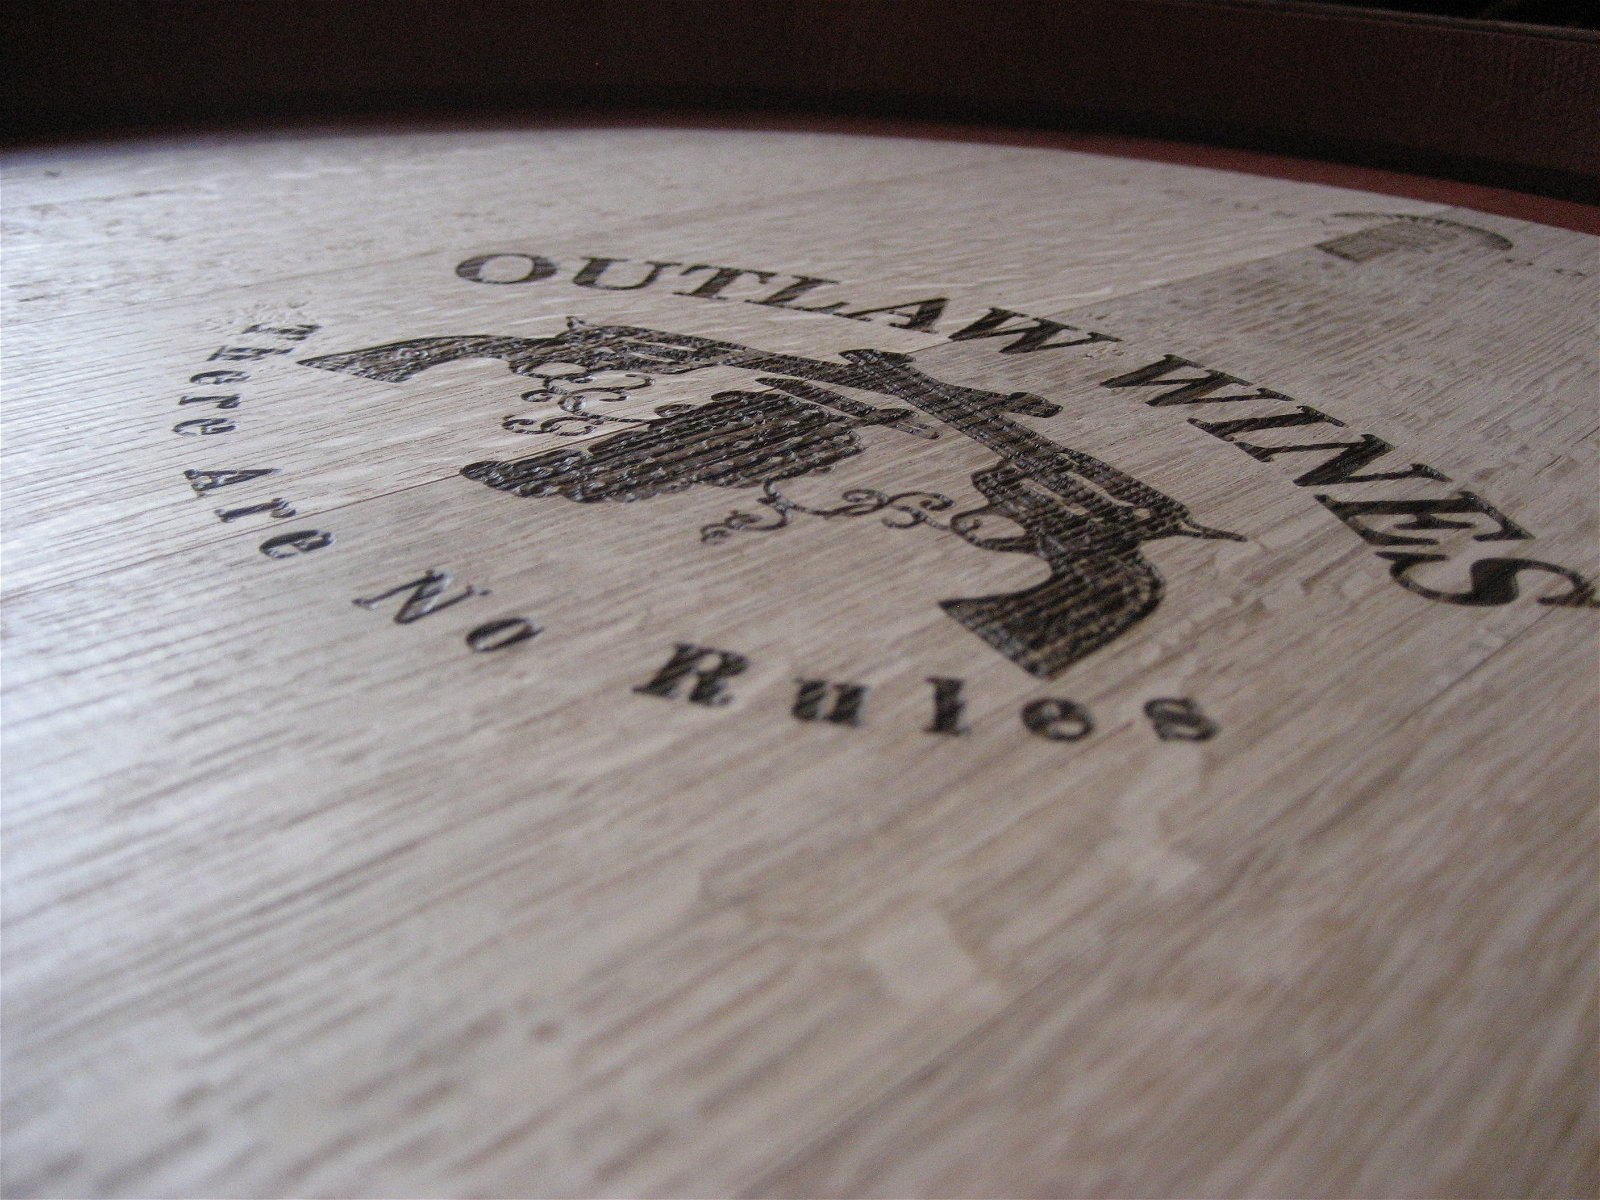 Outlaw Wines - Surfers Paradise Gold Coast